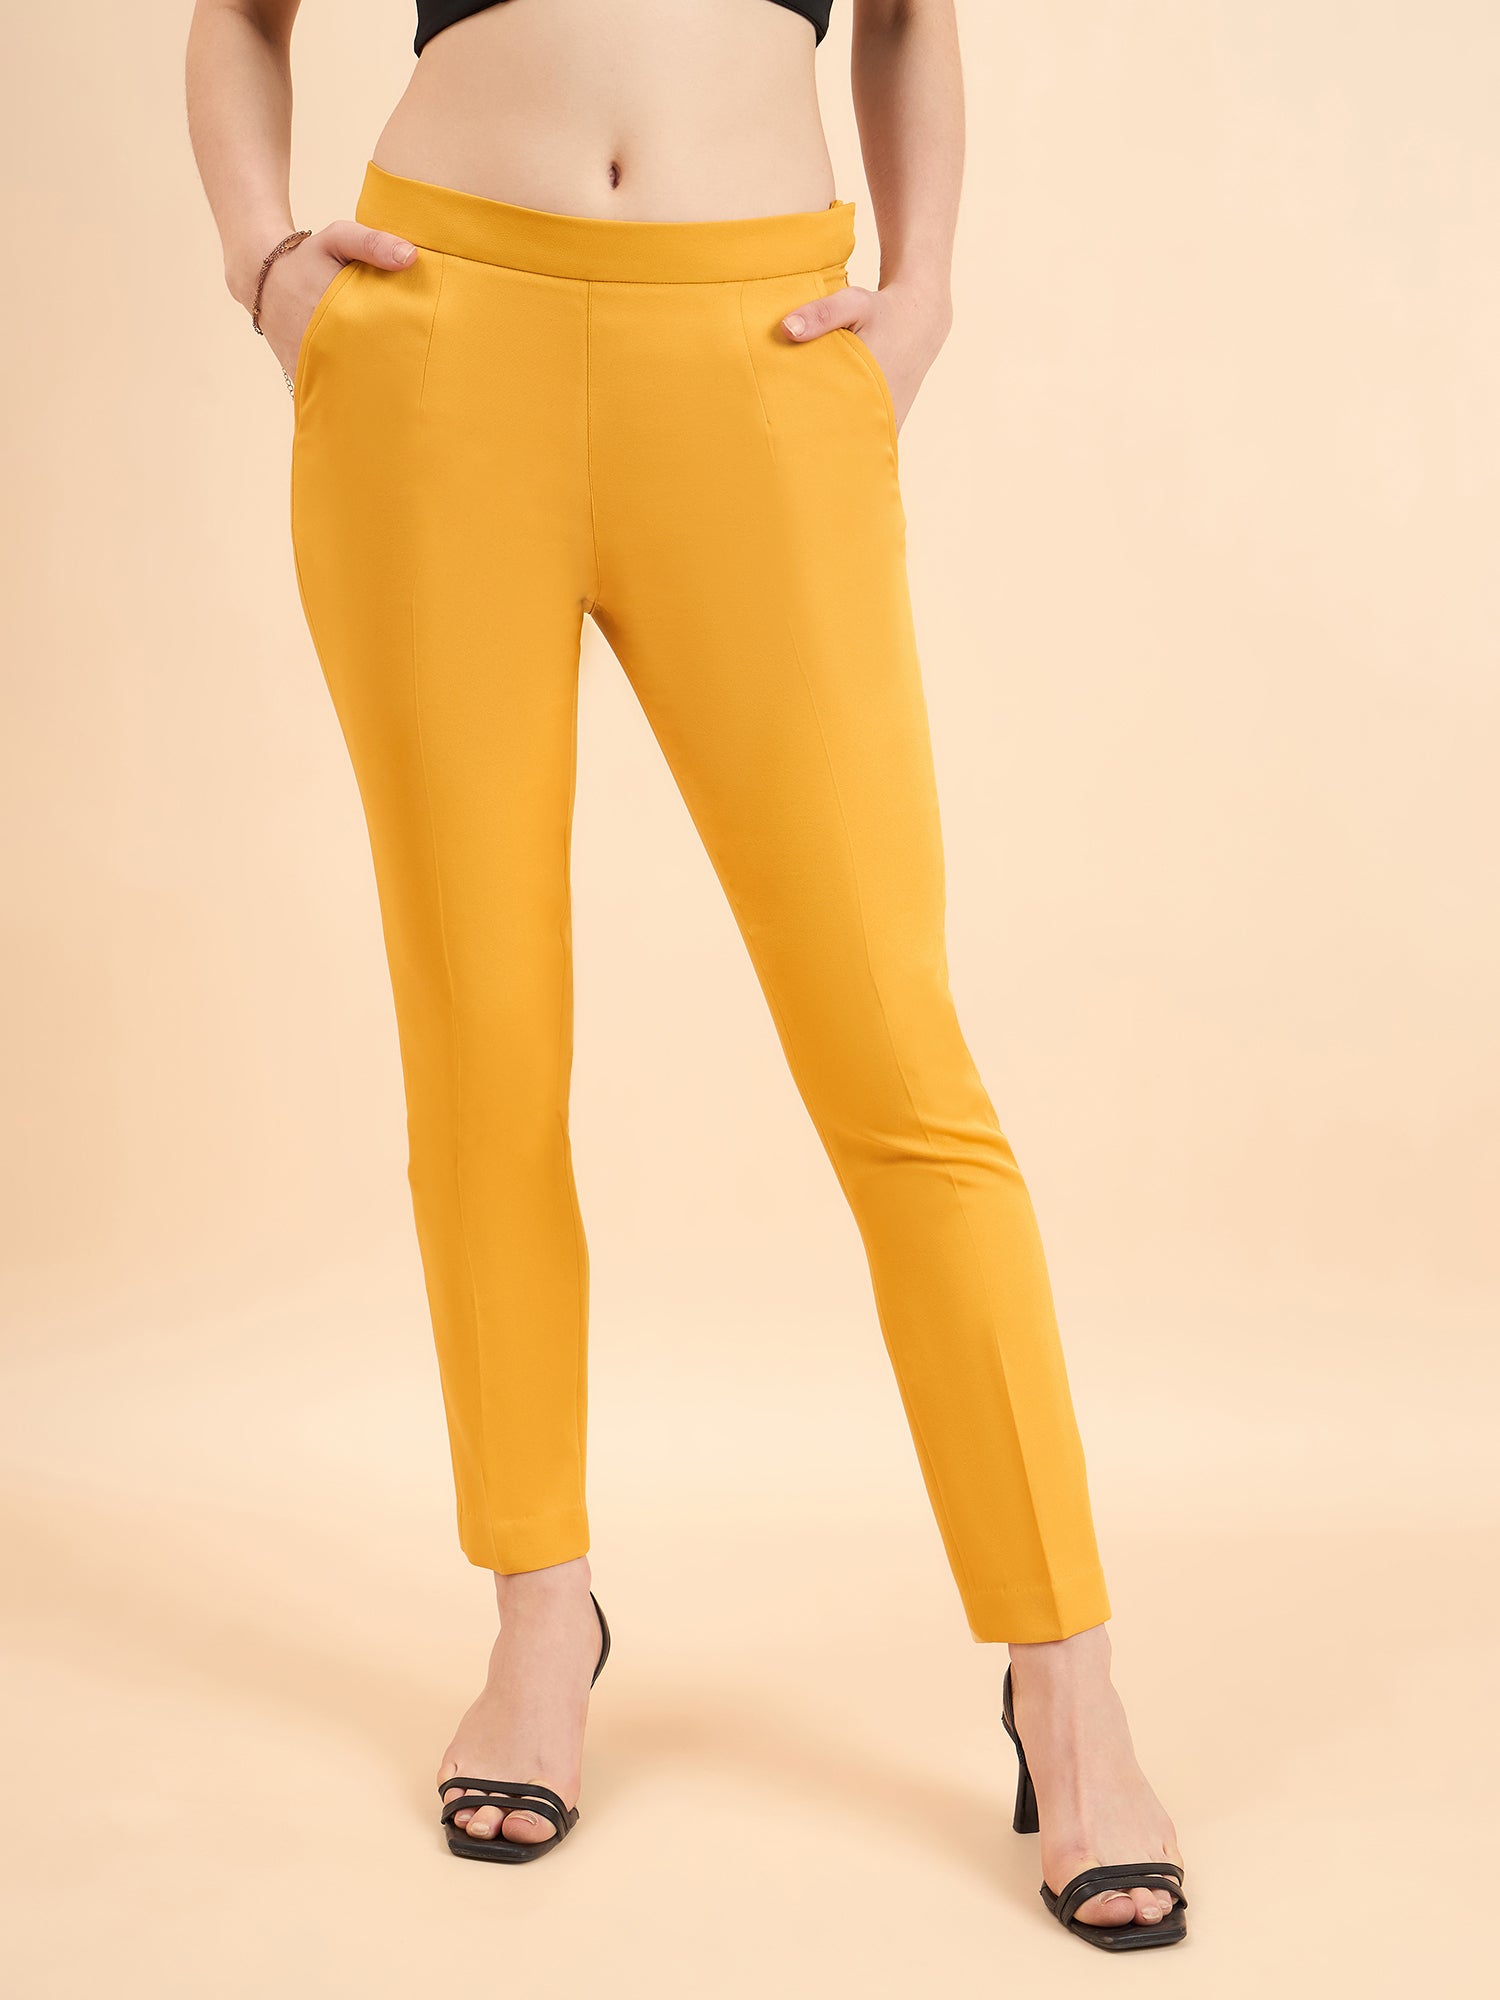 Women's Slim Fit Stretch Trousers - Mustard Yellow